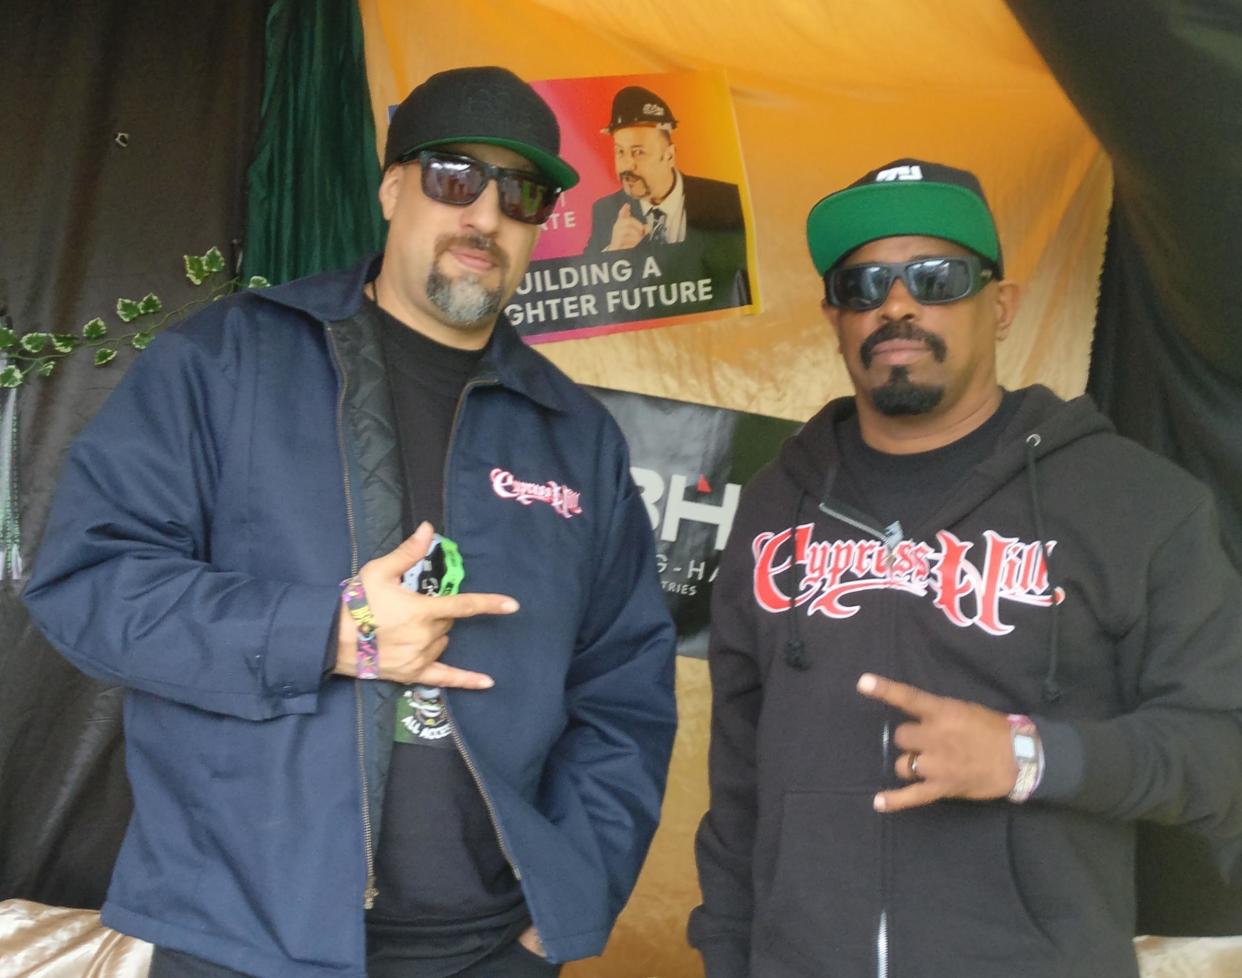 Cypress Hill at Boomtown Festival: Will Worley